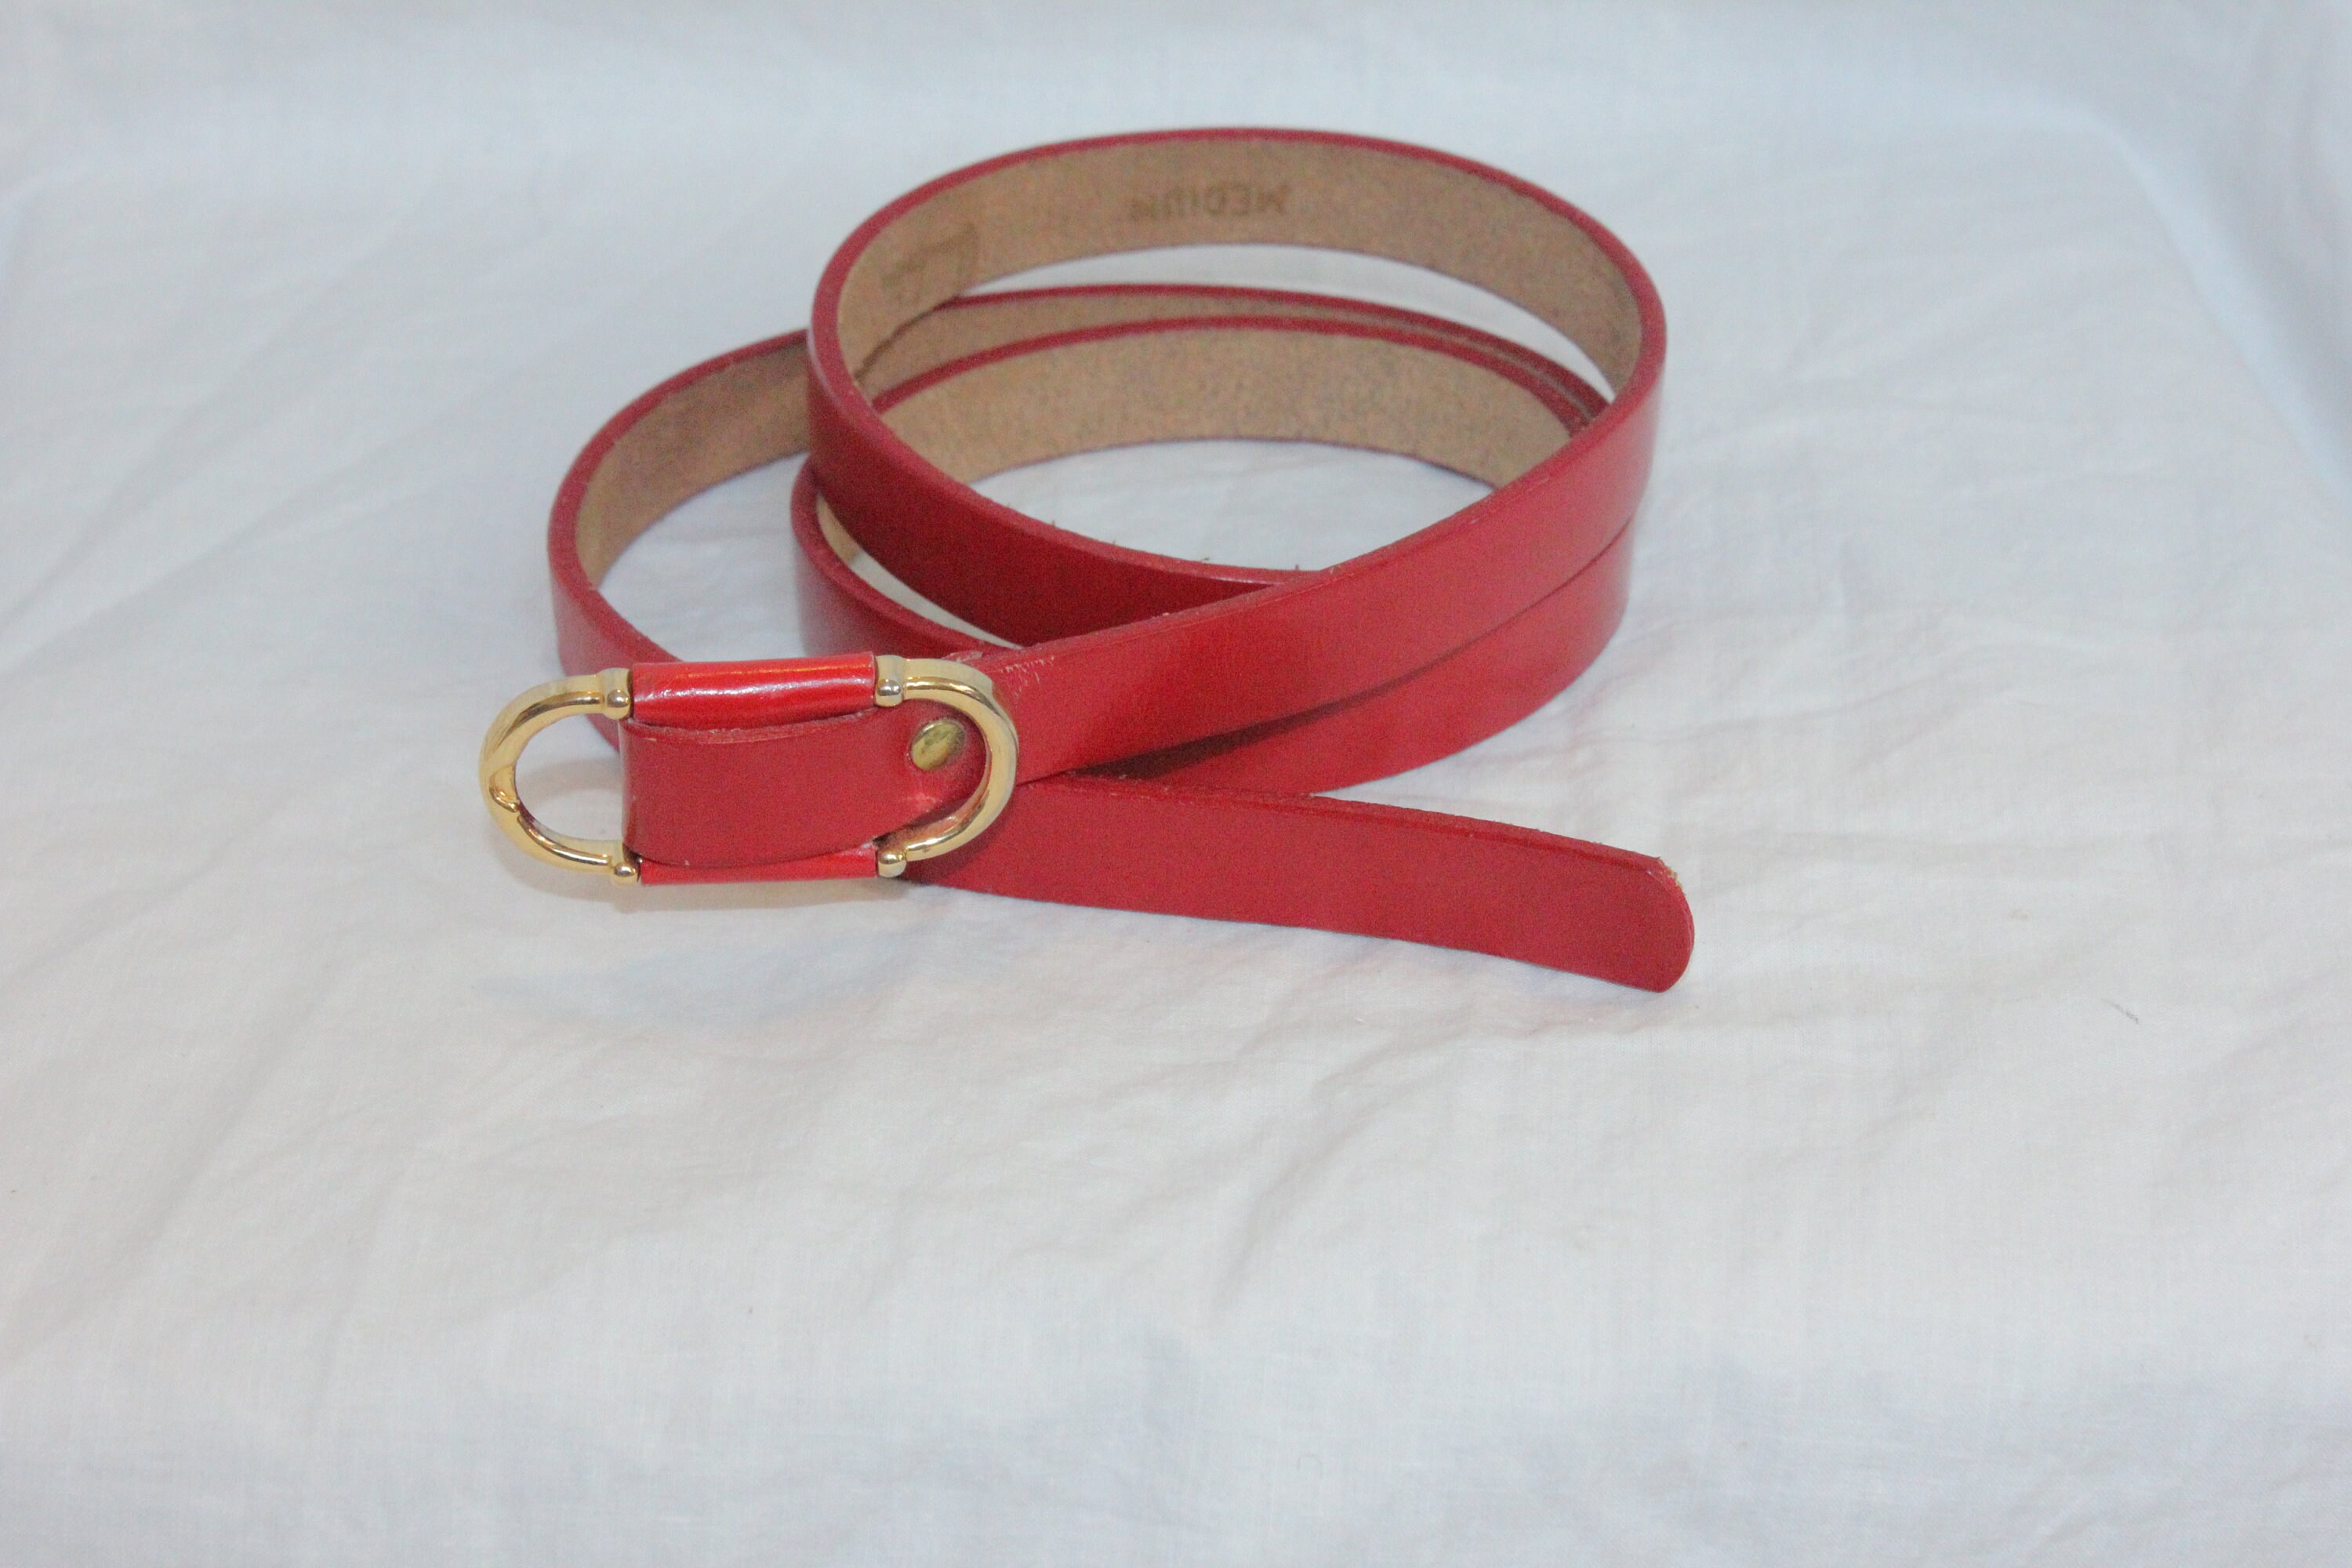 Made in India belt discount 98% Red Single WOMEN FASHION Accessories Belt Red 